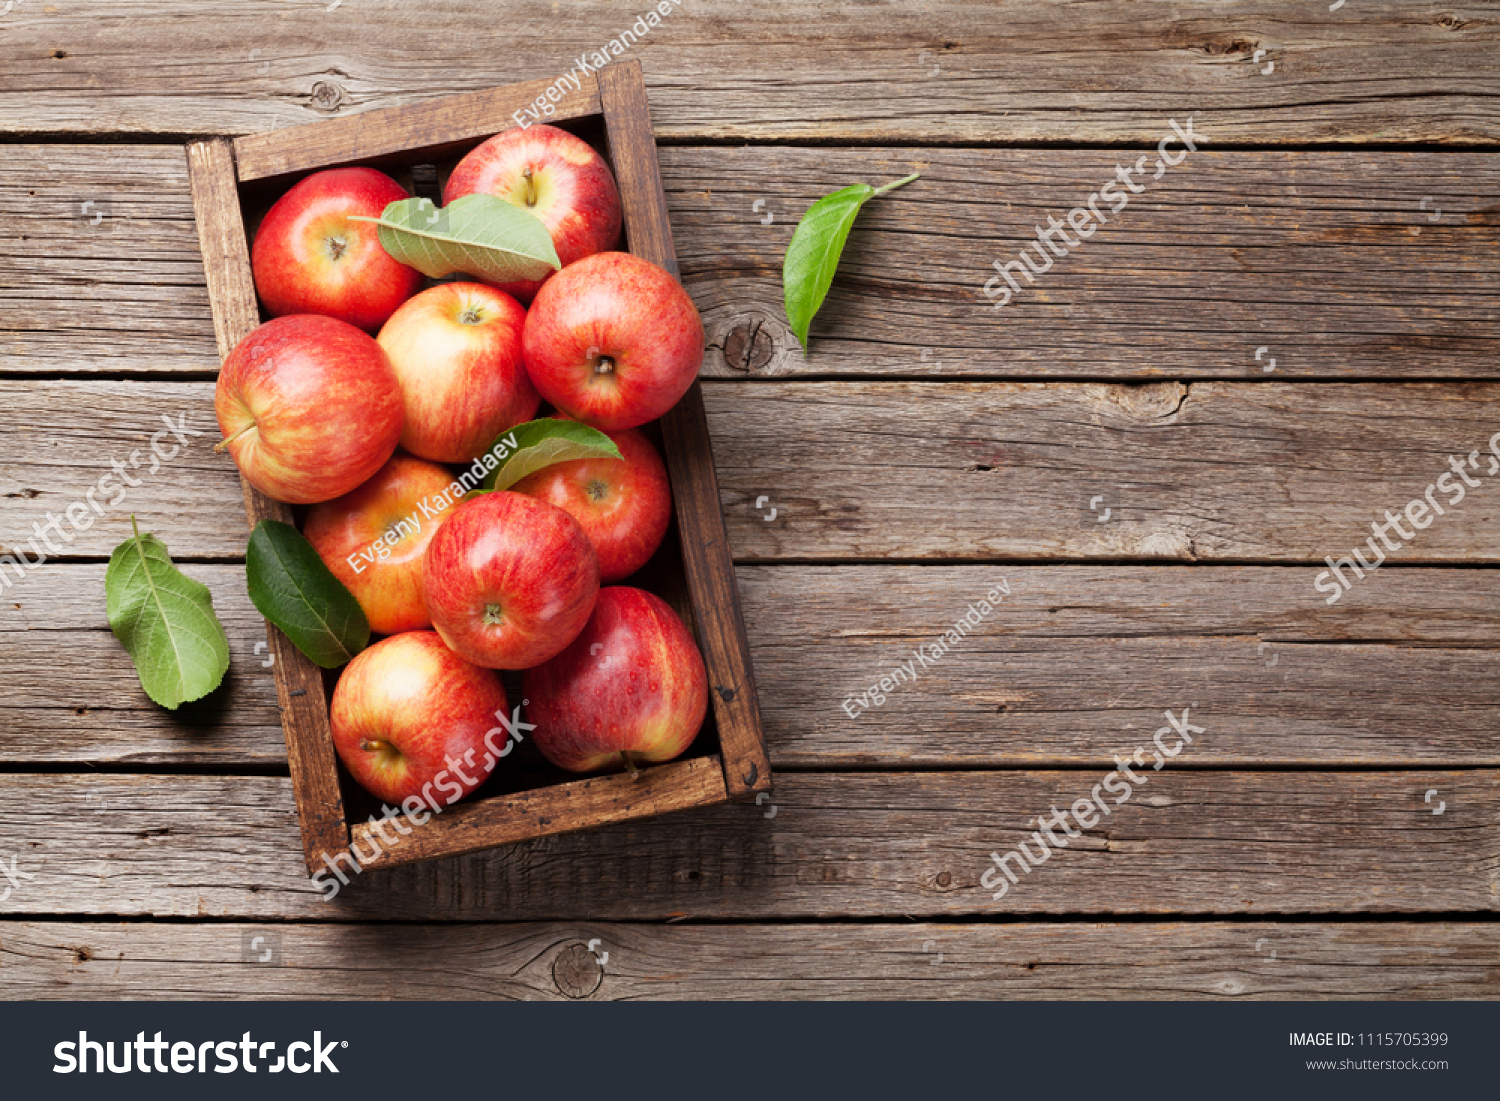 Ripe red apples in wooden box. Top view with space for your text #1115705399